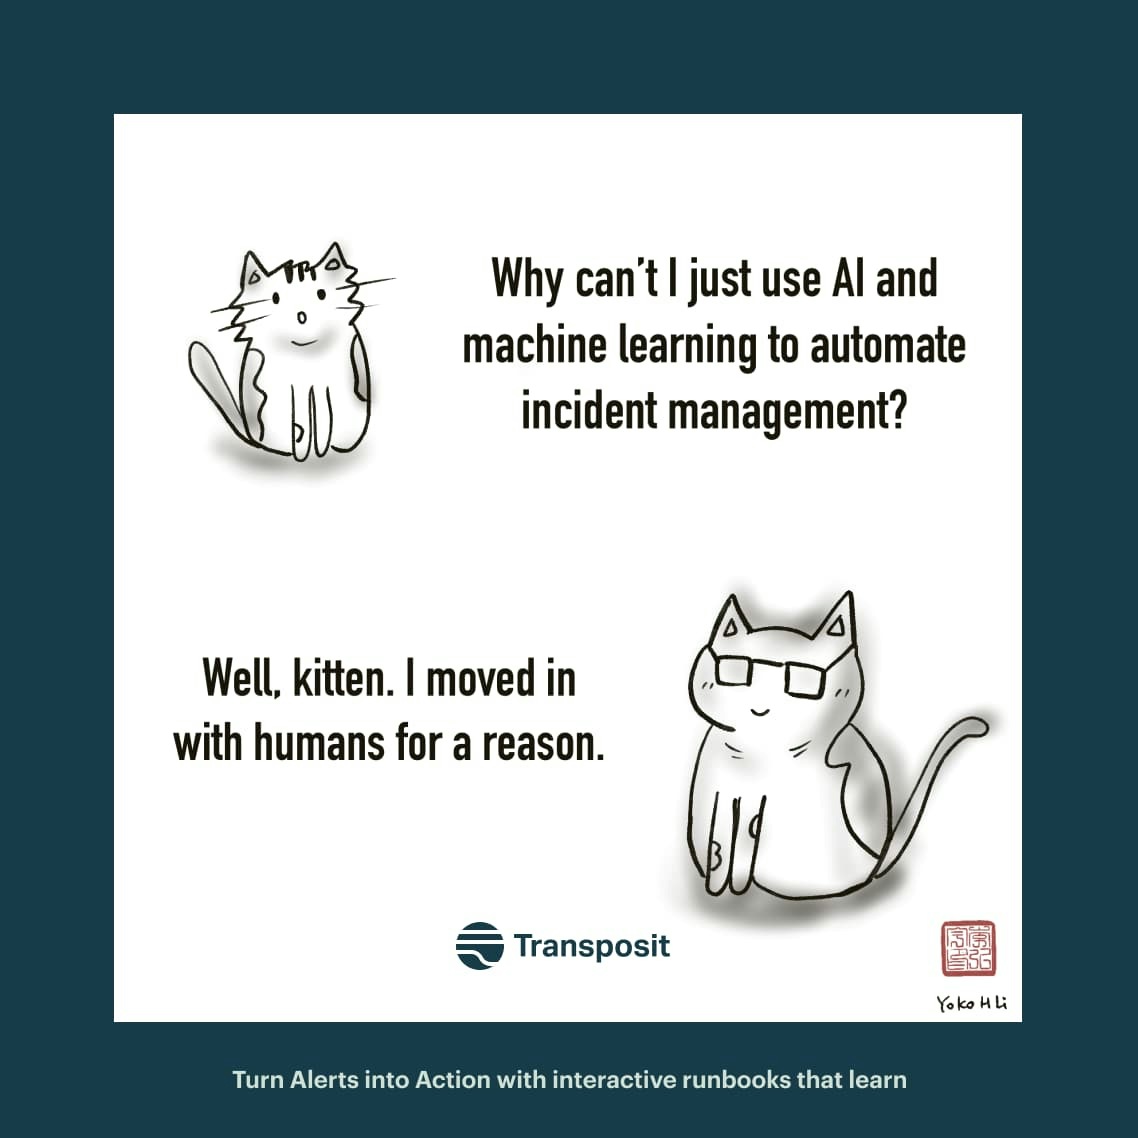 Kitten: "Why can't I just use AI and machine learning to automate incident management? Cat: "Well, kitten. I moved in with humans for a reason."